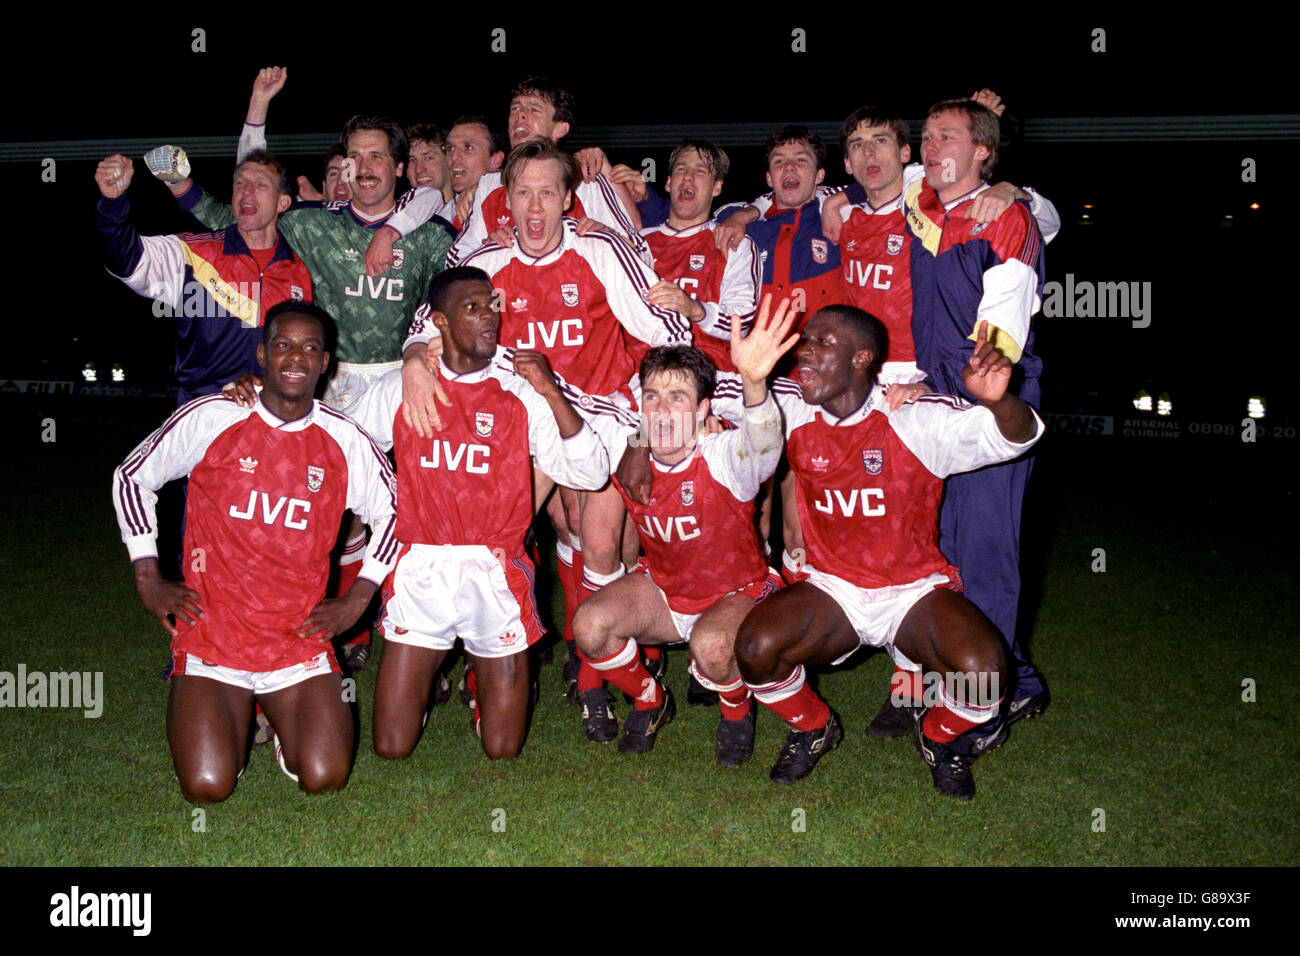 Soccer - Barclays League Division One - Arsenal v Manchester United - Highbury Stock Photo